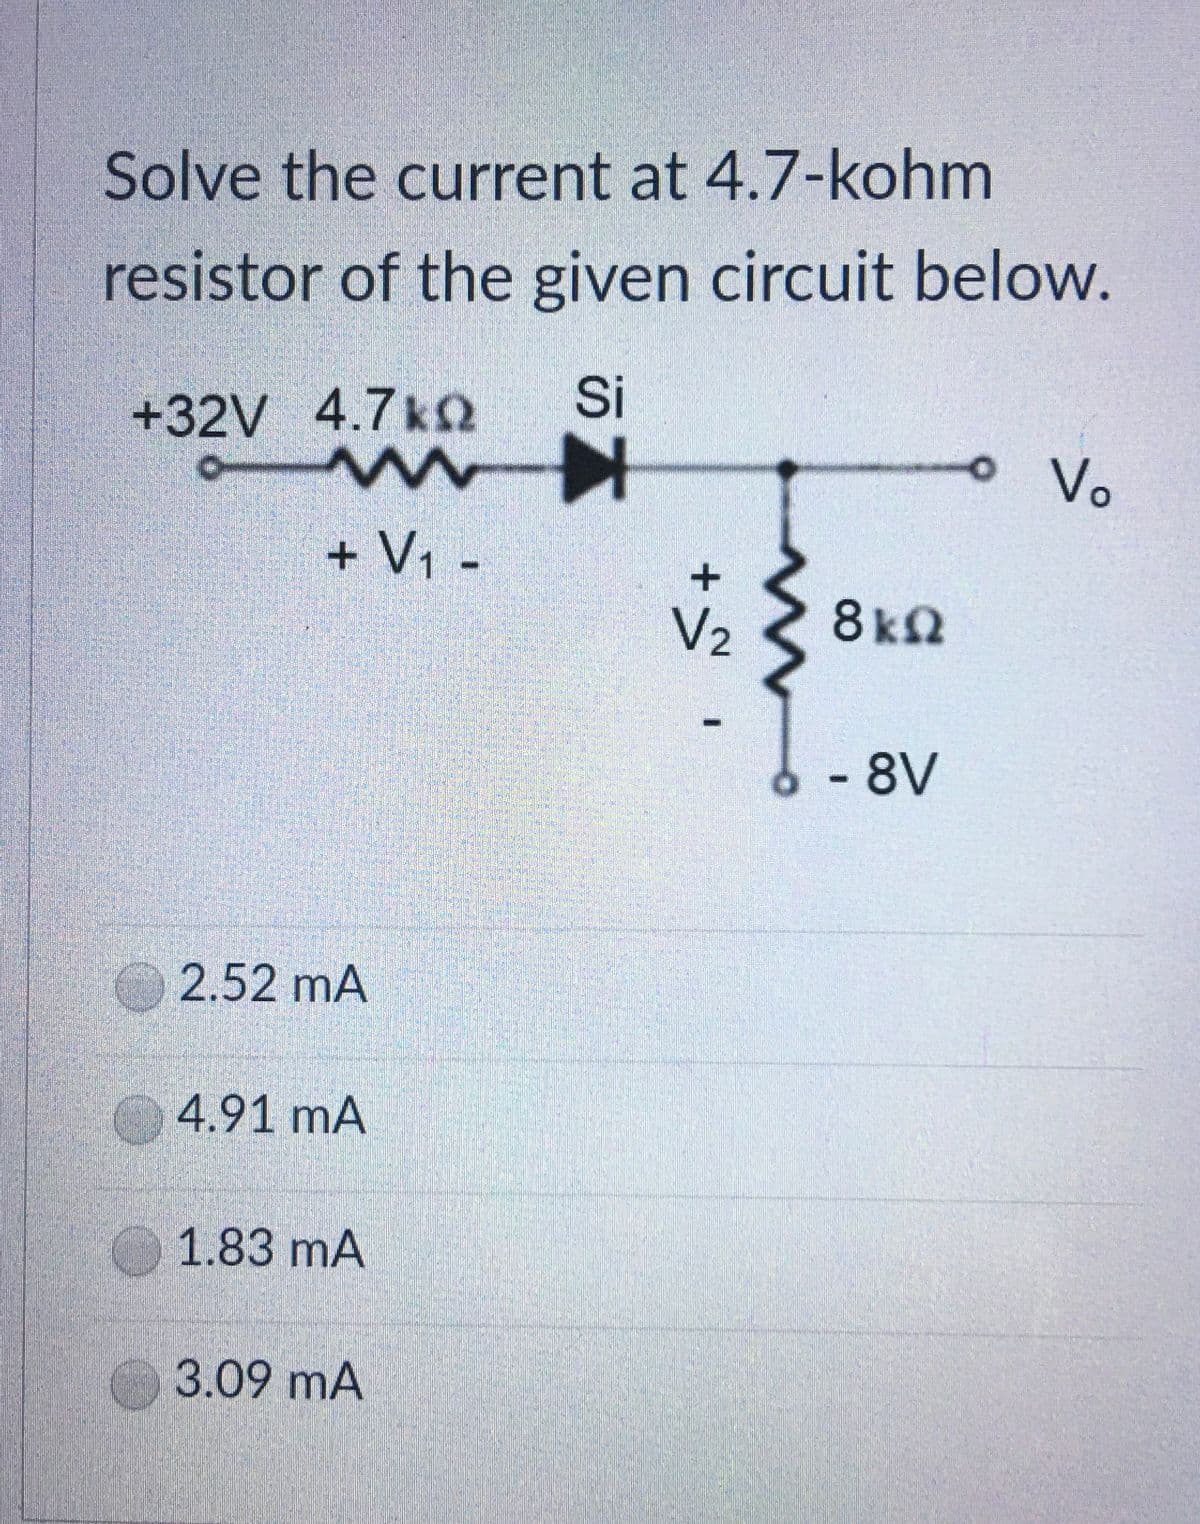 Solve the current at 4.7-kohm
resistor of the given circuit below.
+32V 4.7k
Si
Vo
+ V1 -
V2
8kn
- 8V
O 2.52 mA
4.91 mA
1.83 mA
3.09 mA
